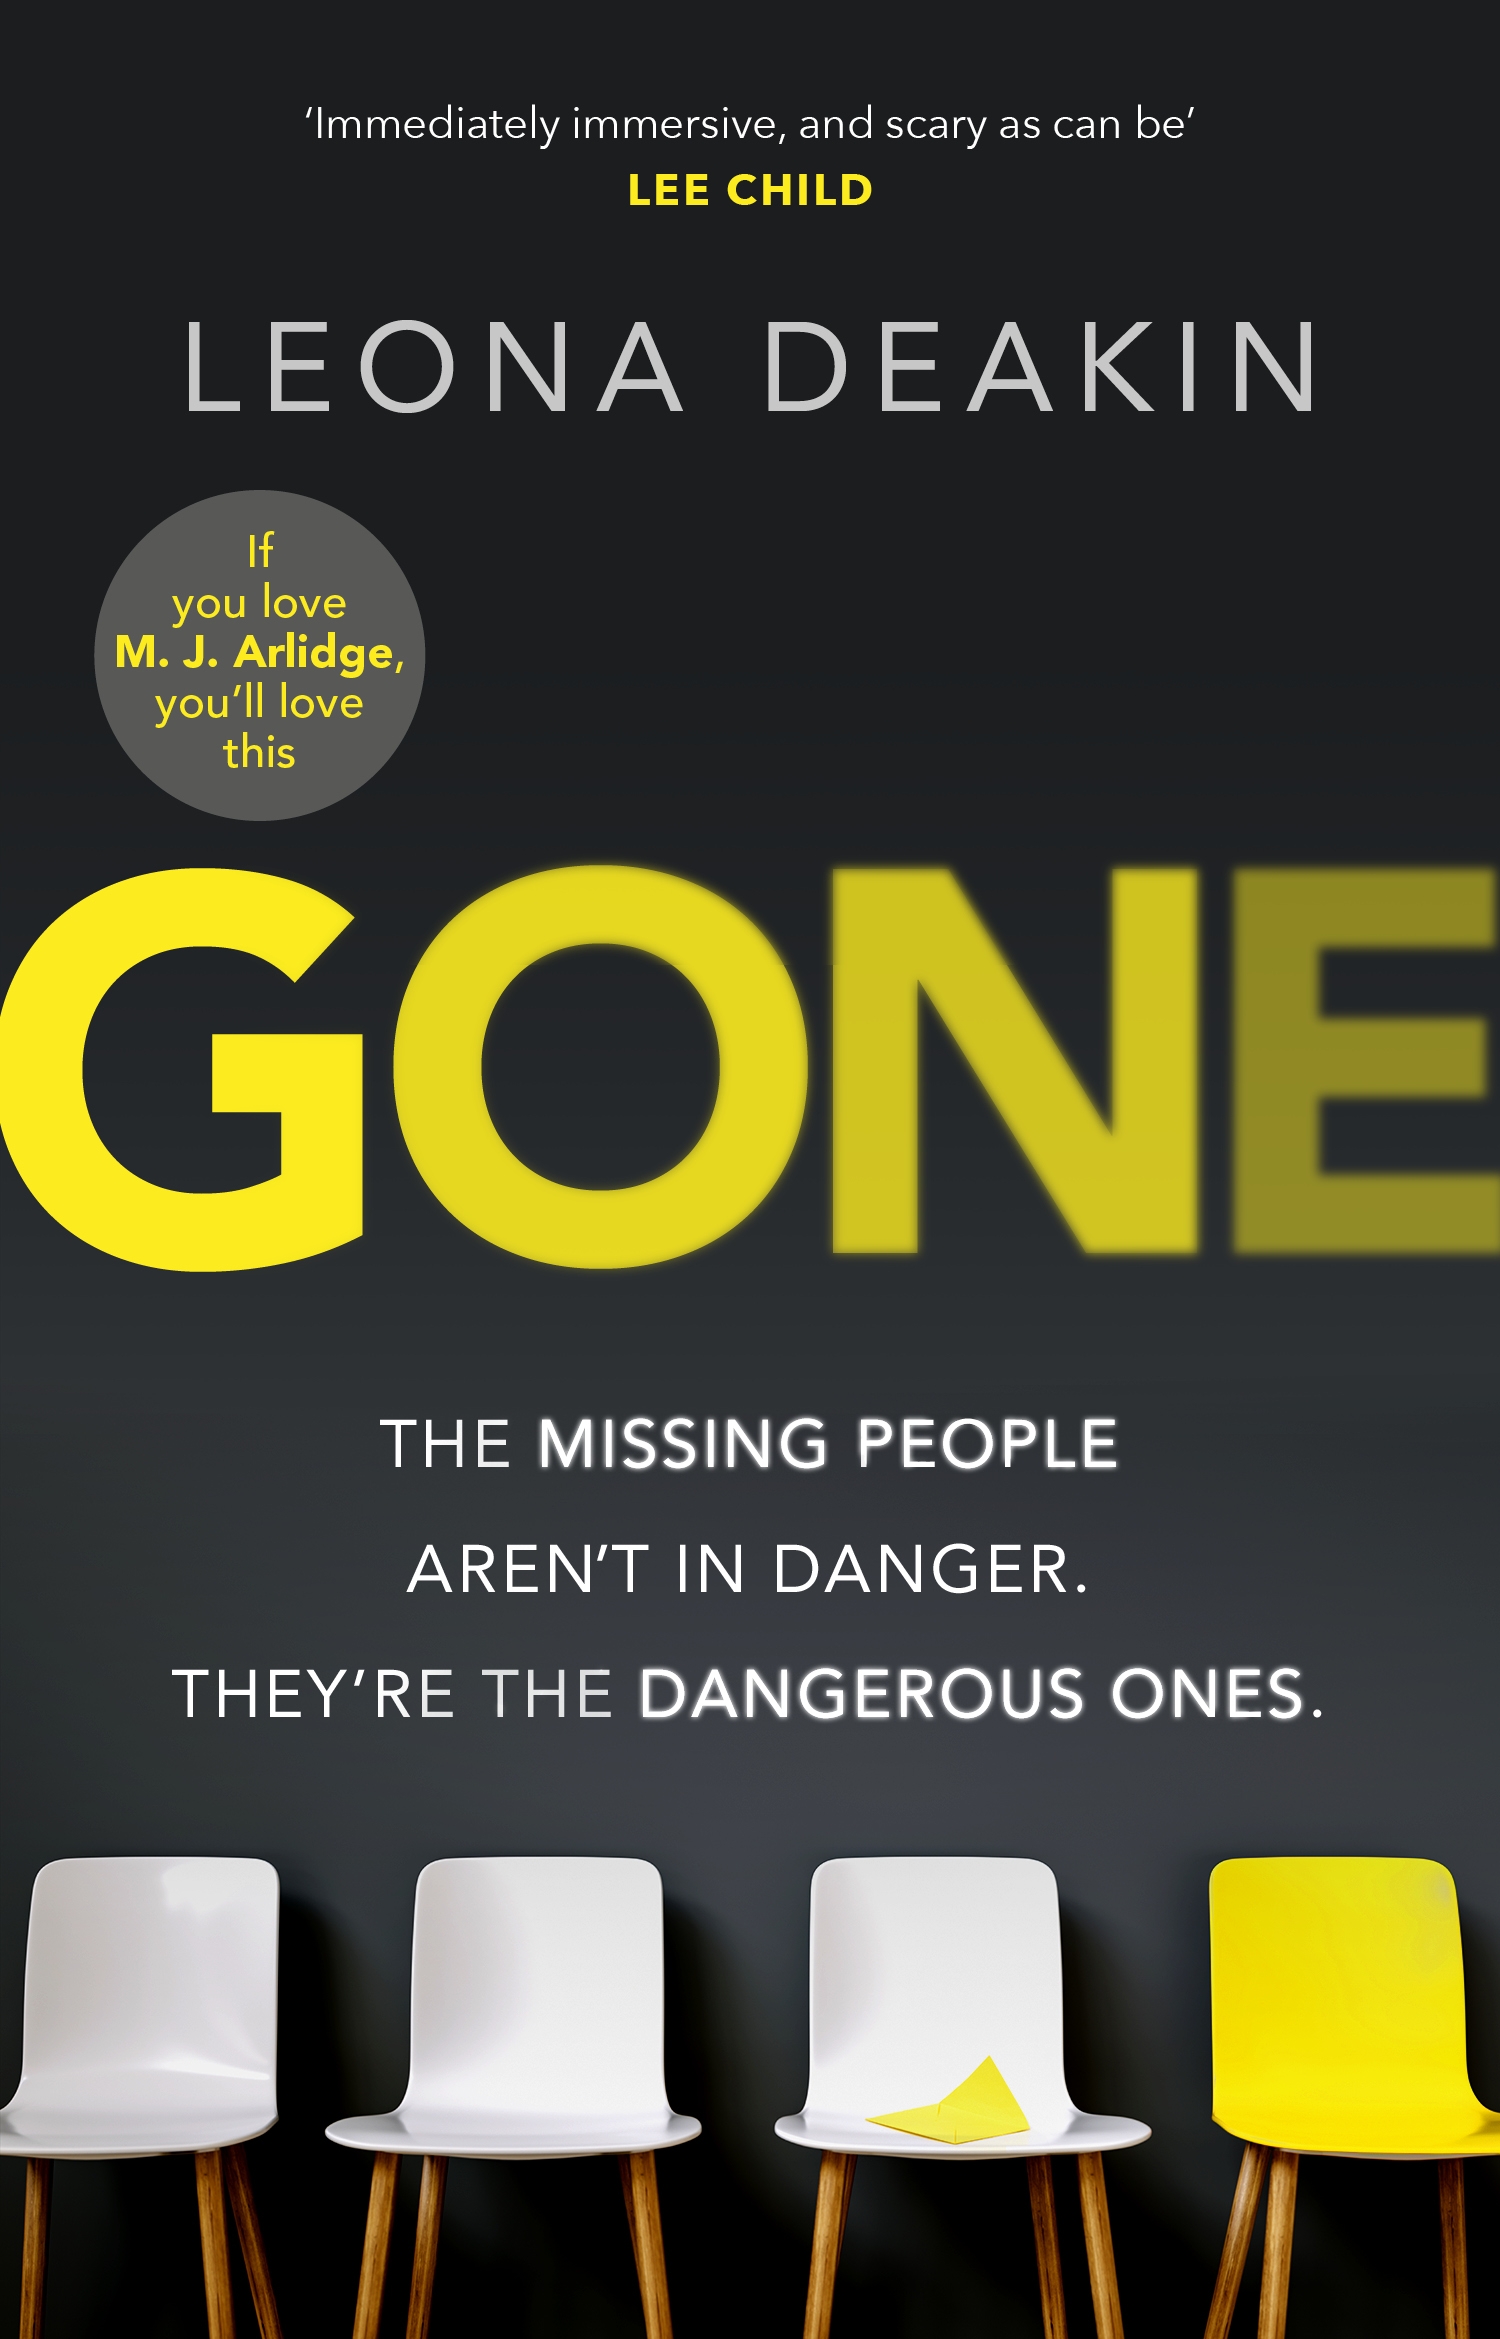 GONE MISSING PEOPLE ARENT IN DANGER | Book Review